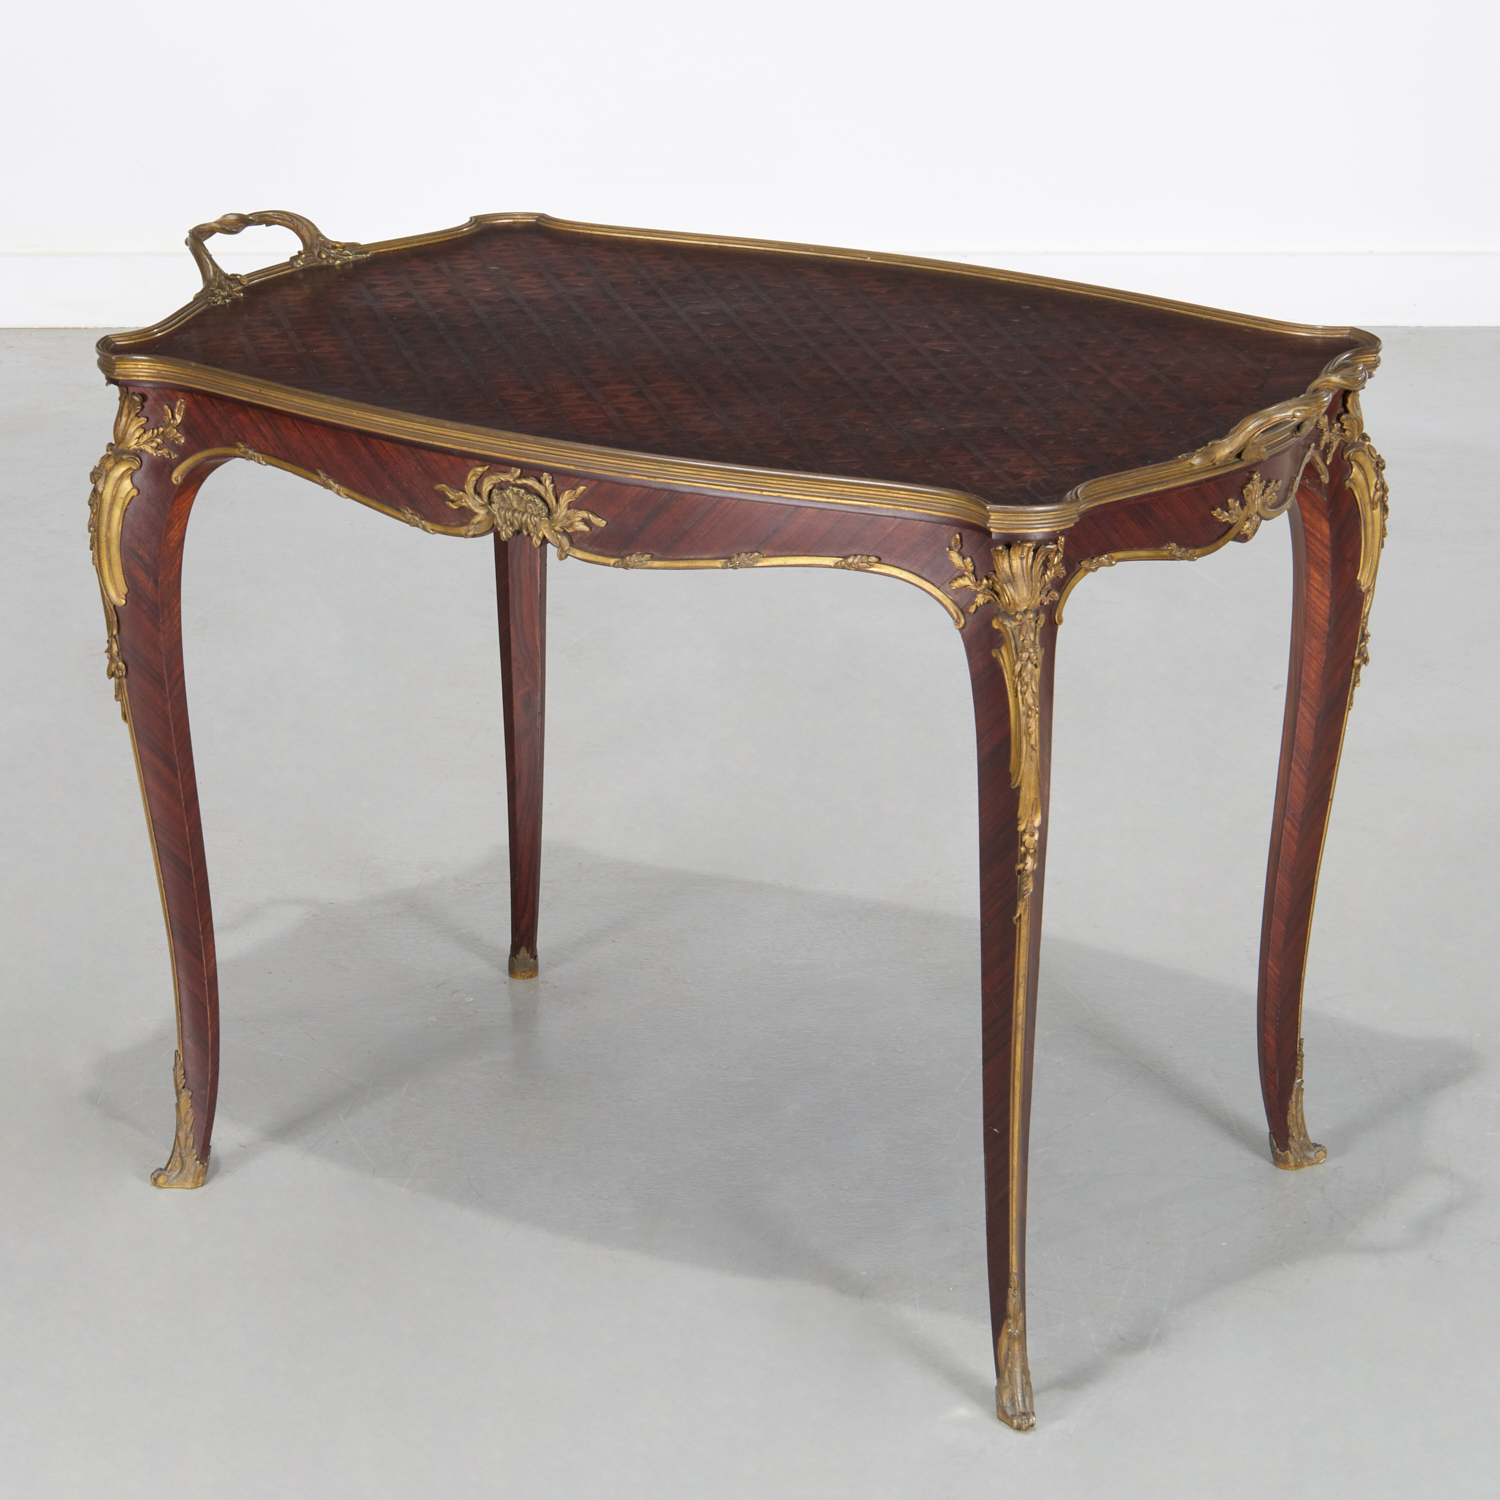 LOUIS XV STYLE ORMOLU MOUNTED PARQUETRY 3604a3